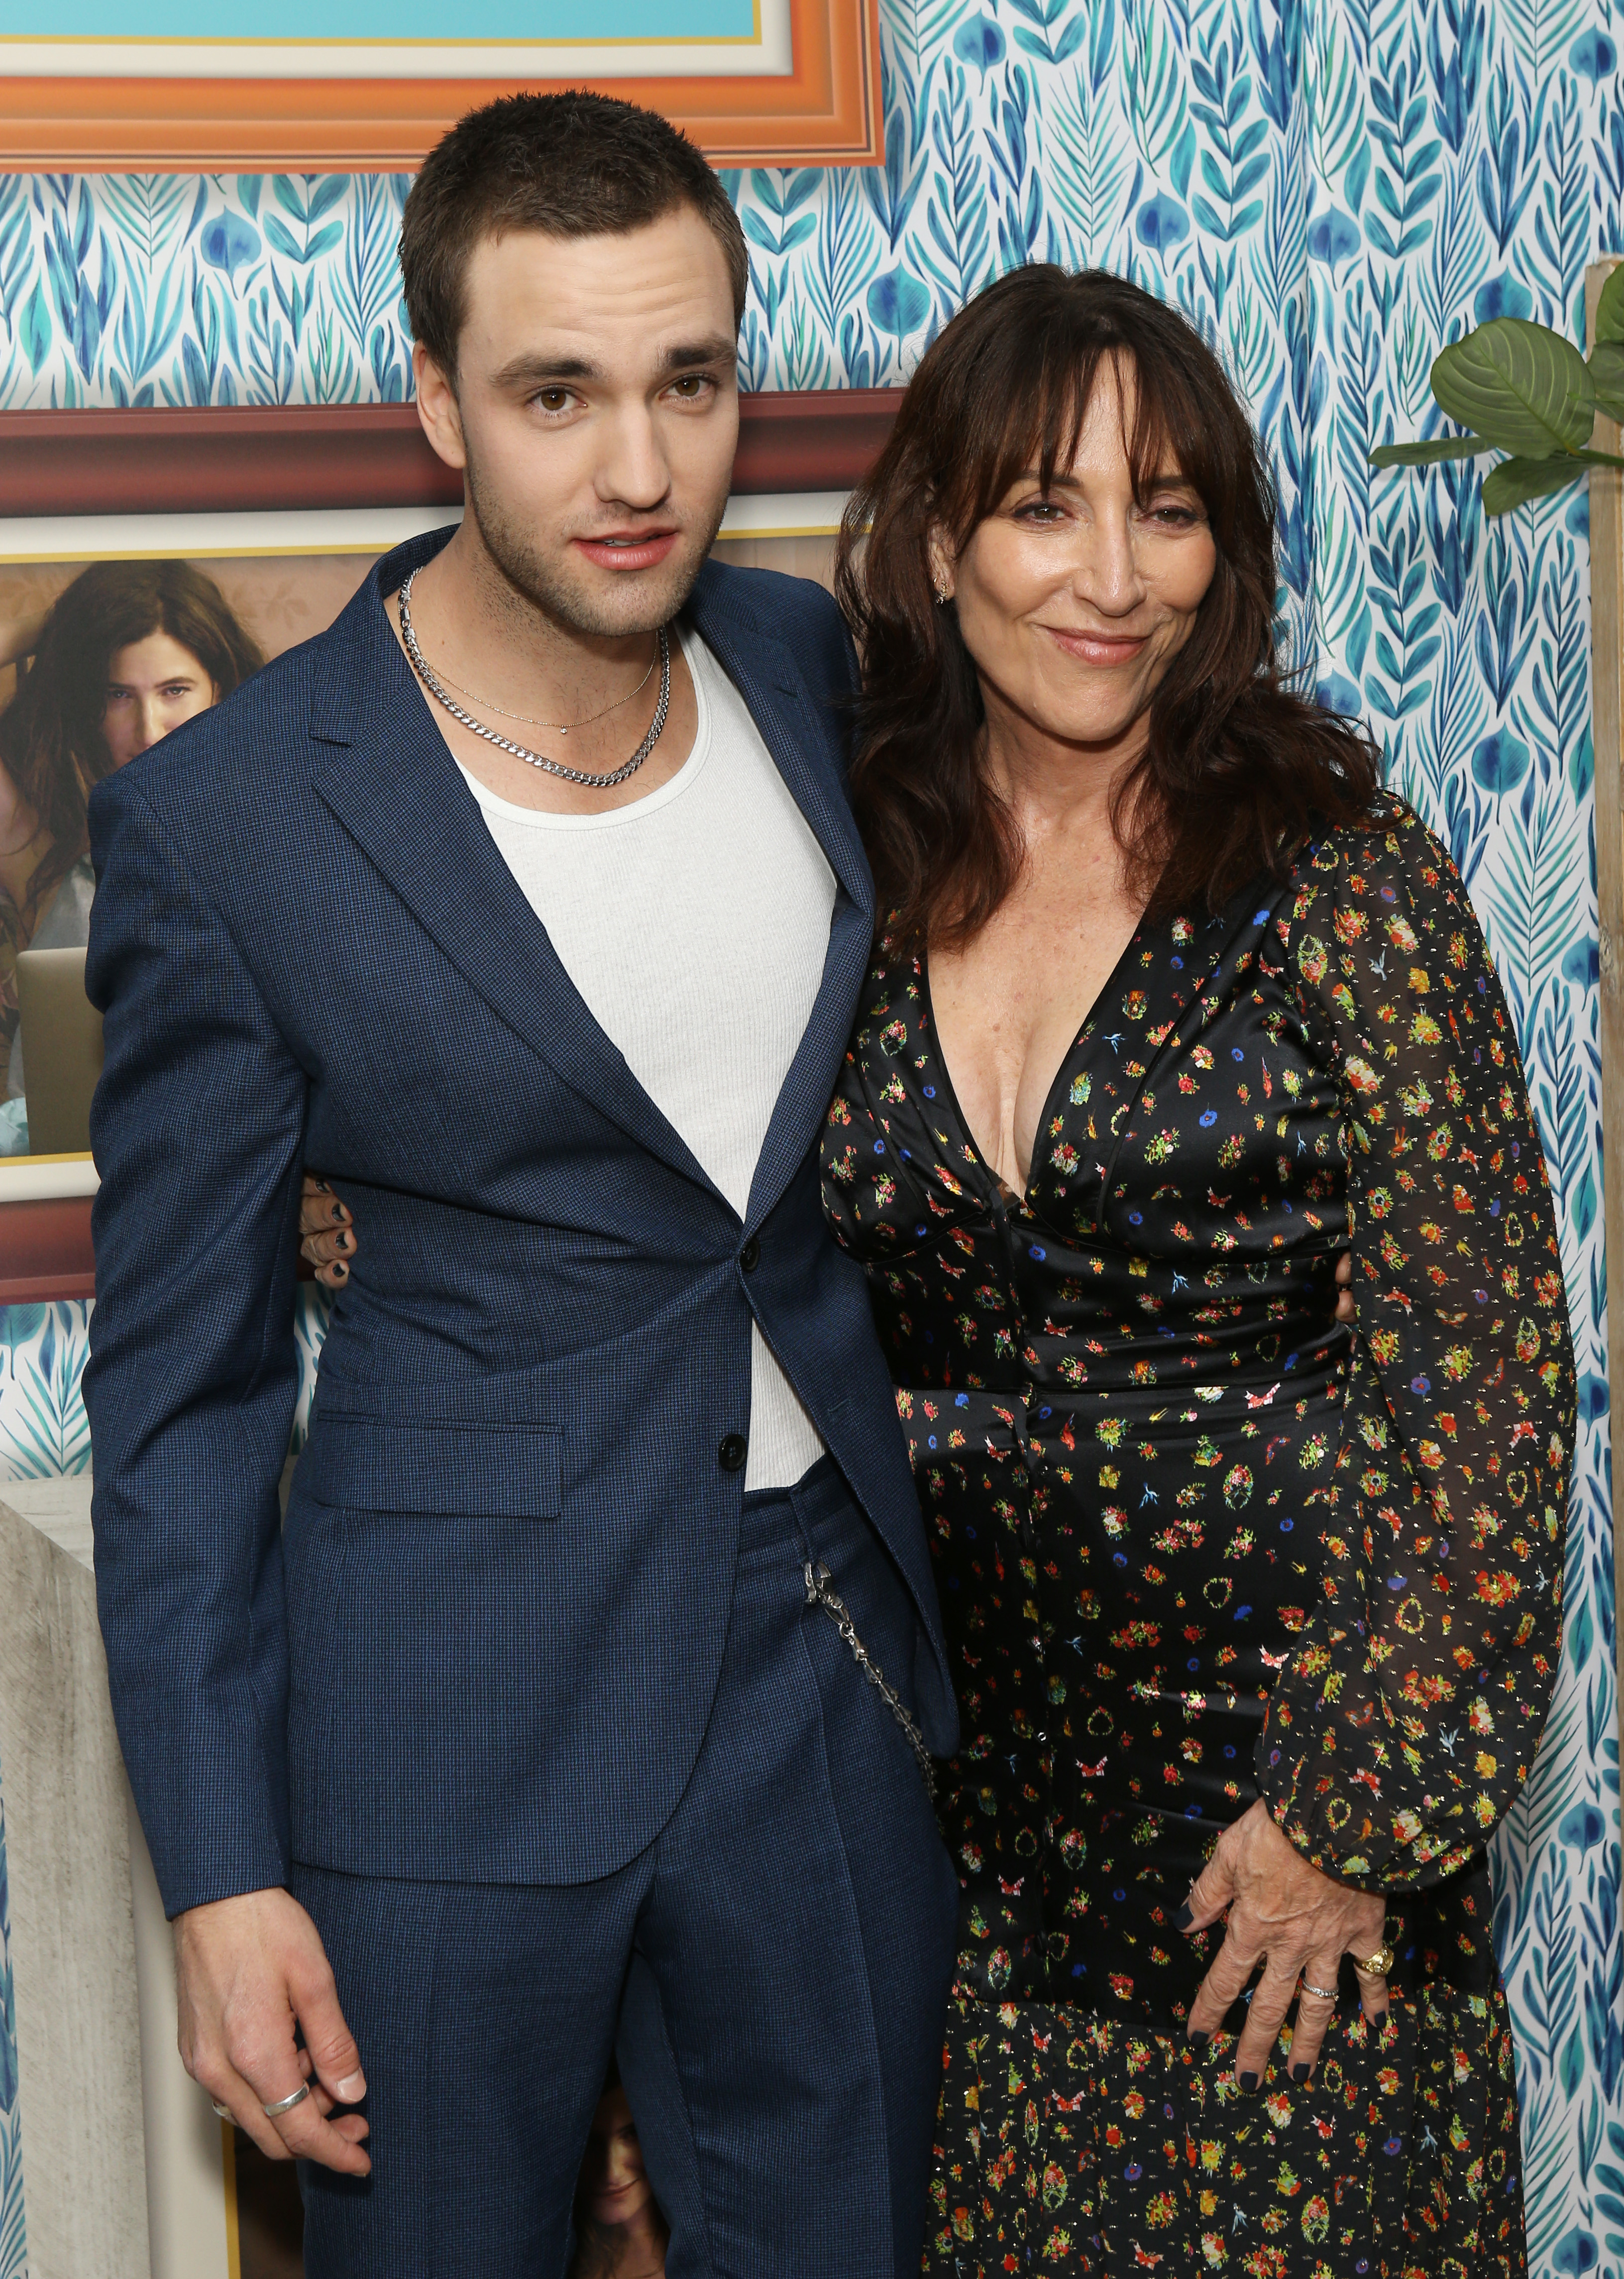 her arm around her son at an event